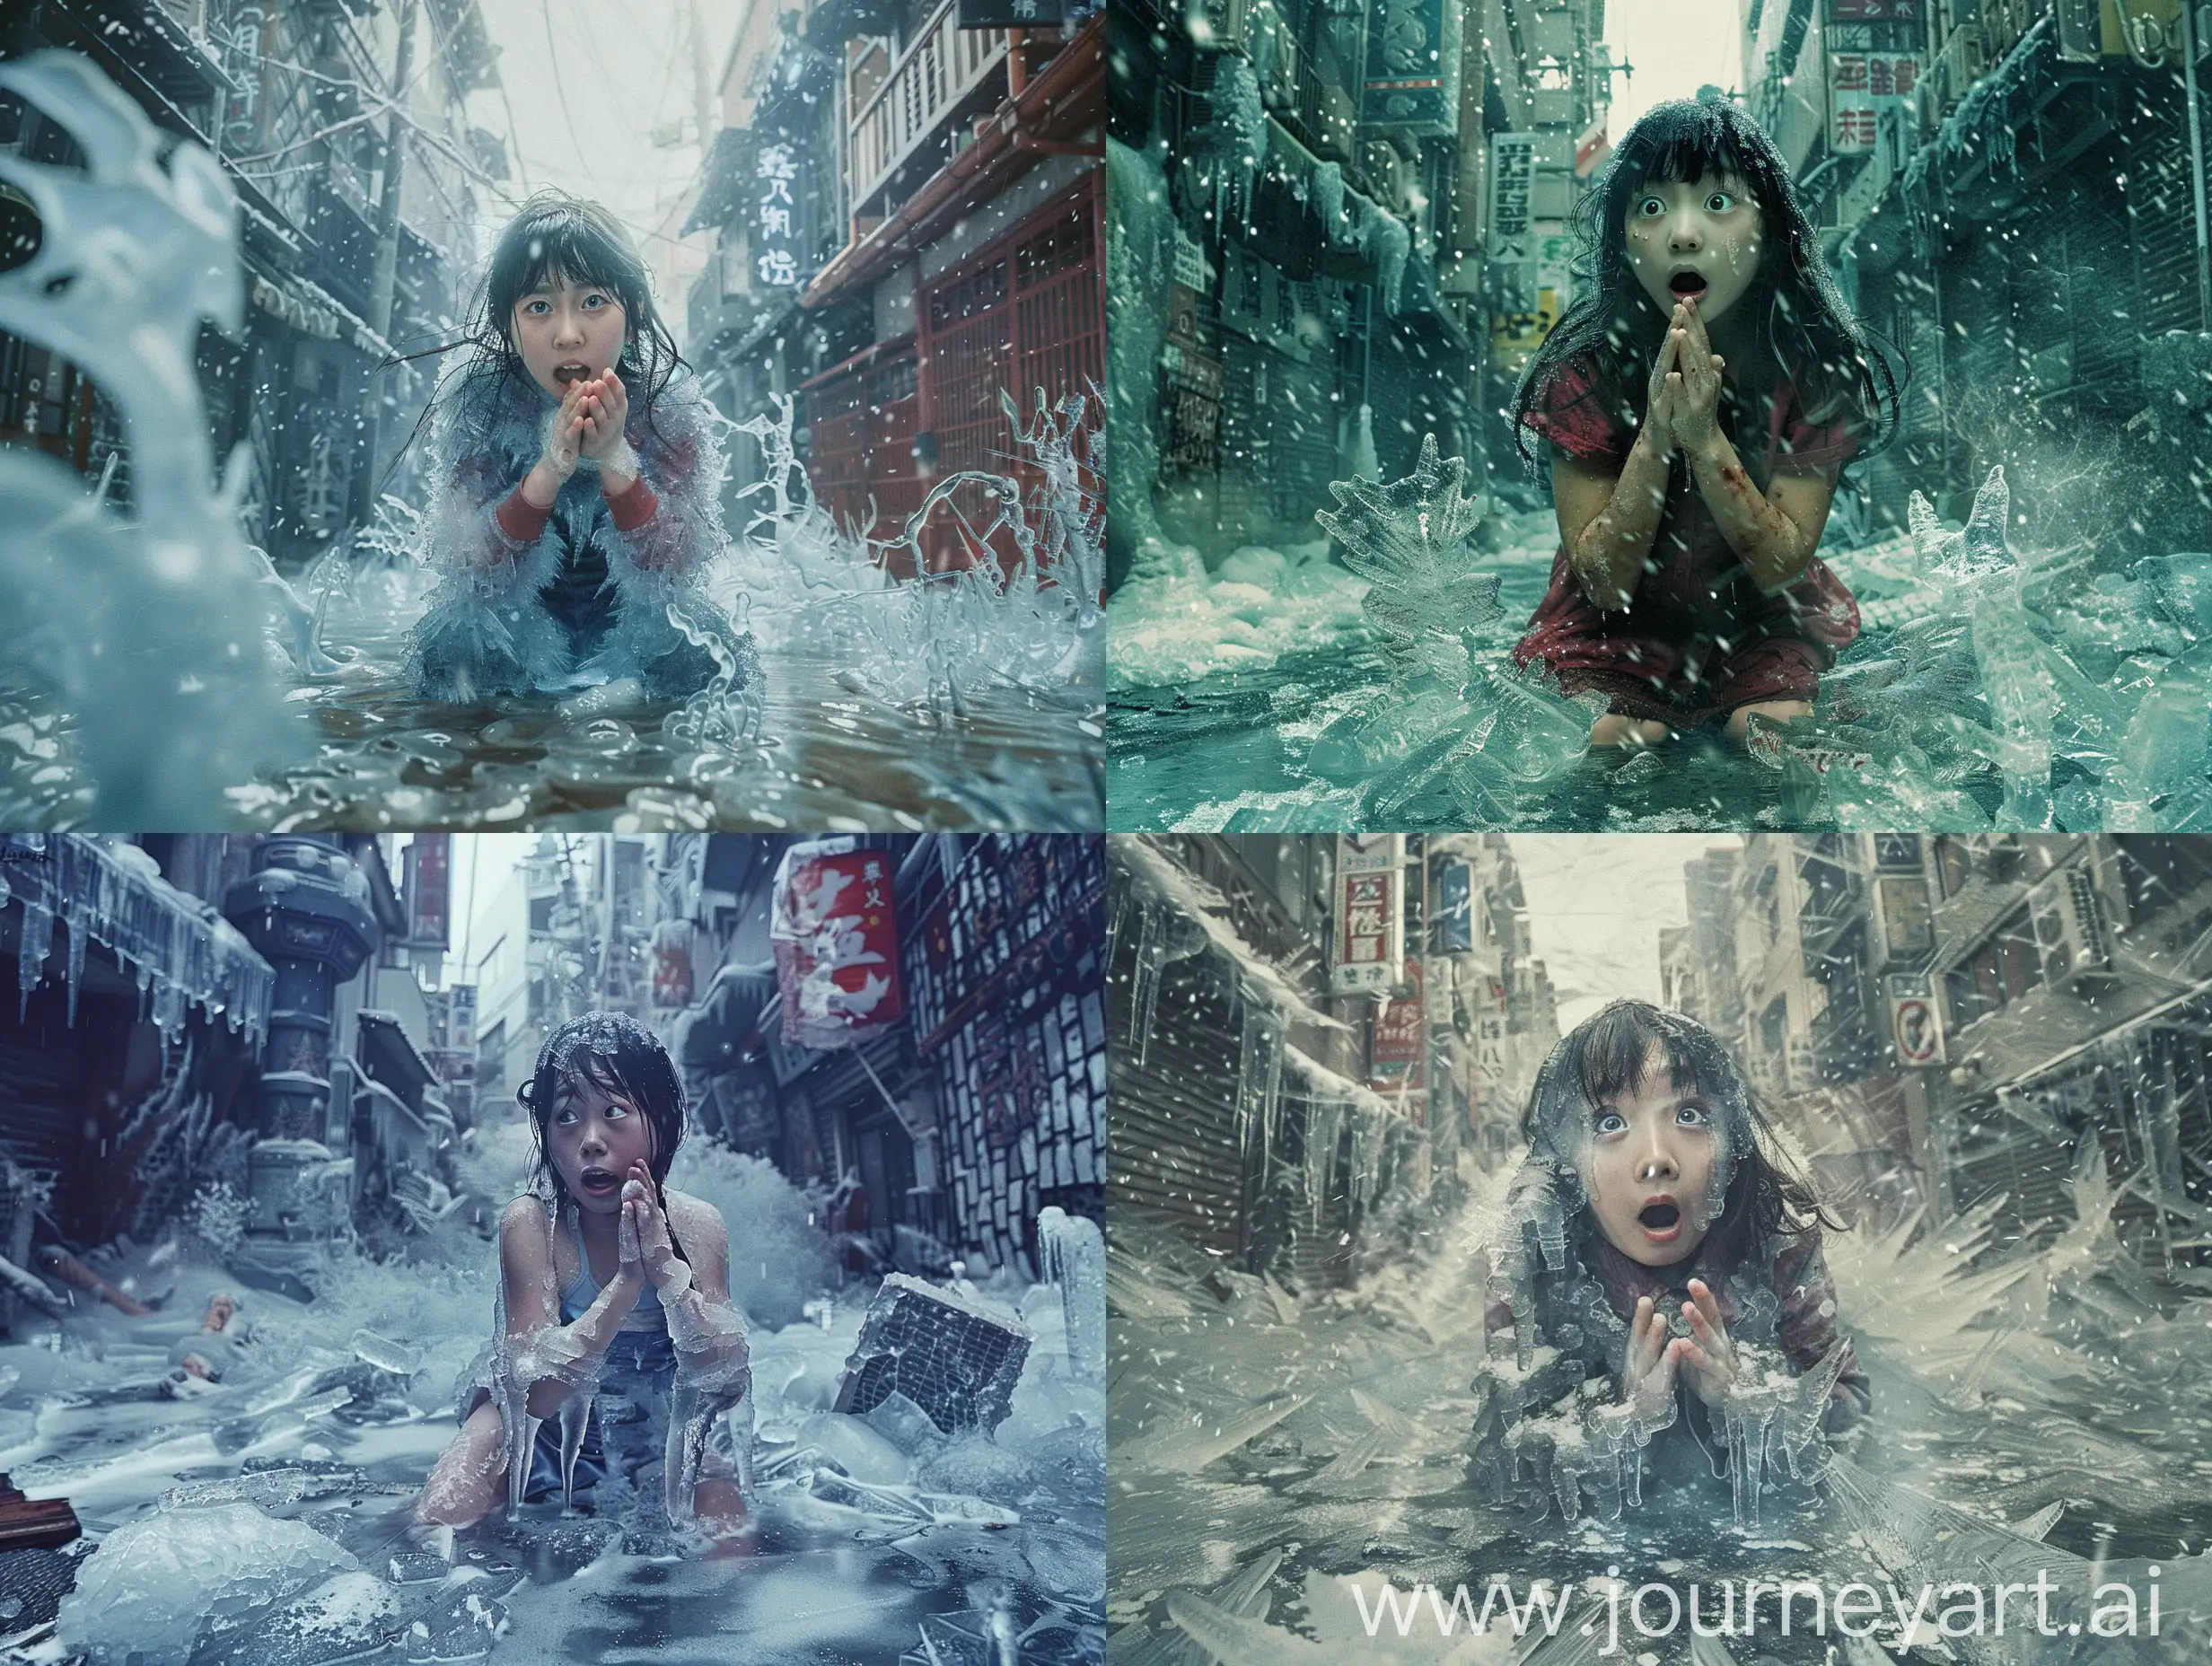 Surreal-Folk-Horror-Japanese-Girl-Frozen-in-Ice-Amidst-Apocalyptic-Storm